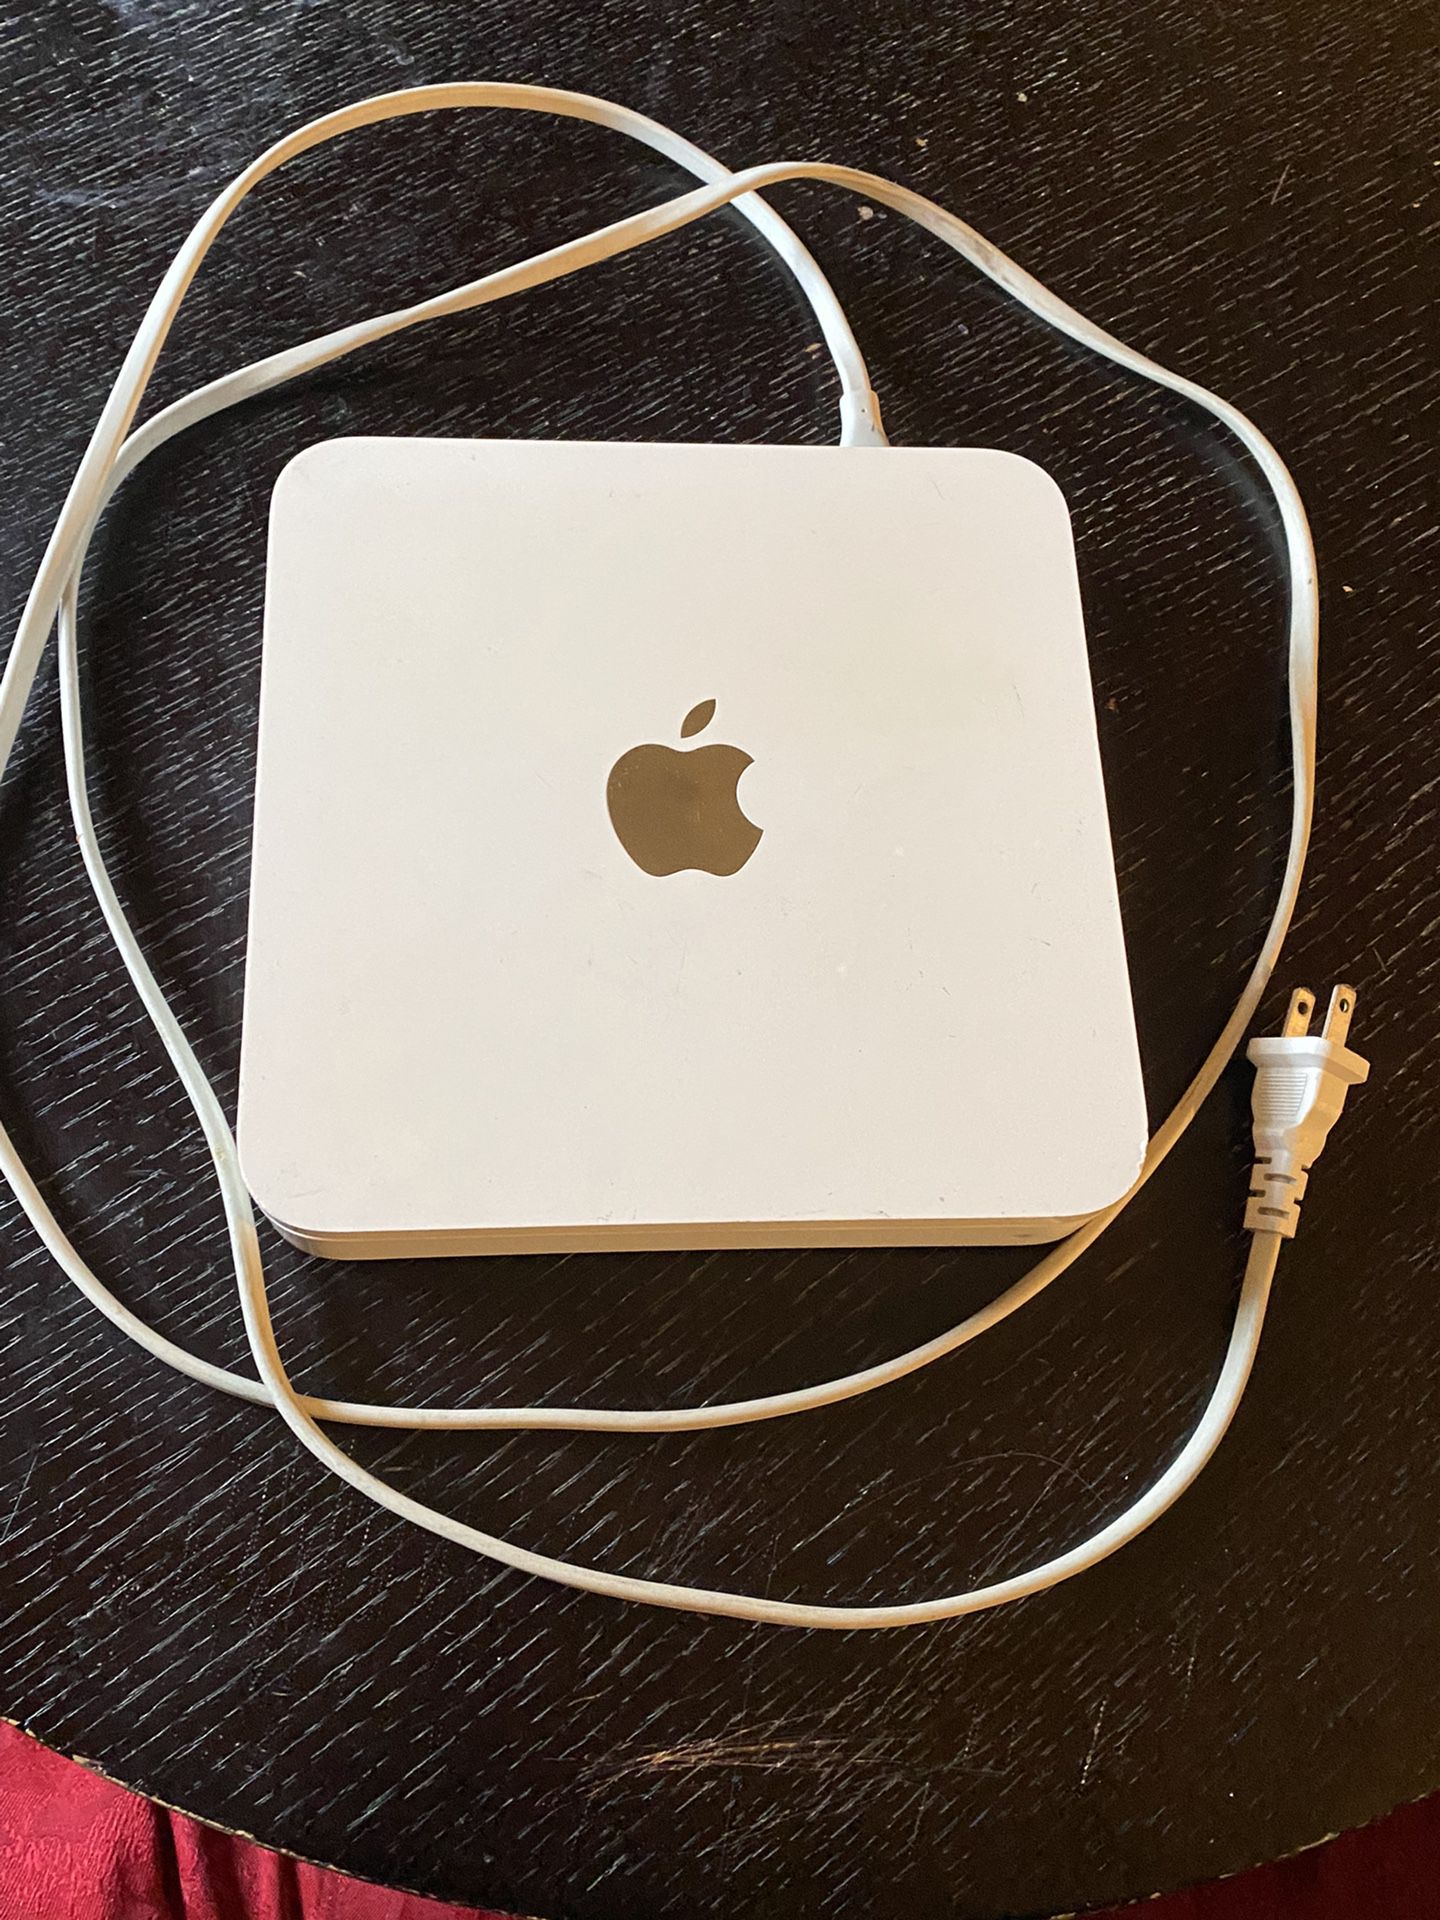 Apple Airport Time | A1355 | 1TB HDD for Sale in New York, NY -